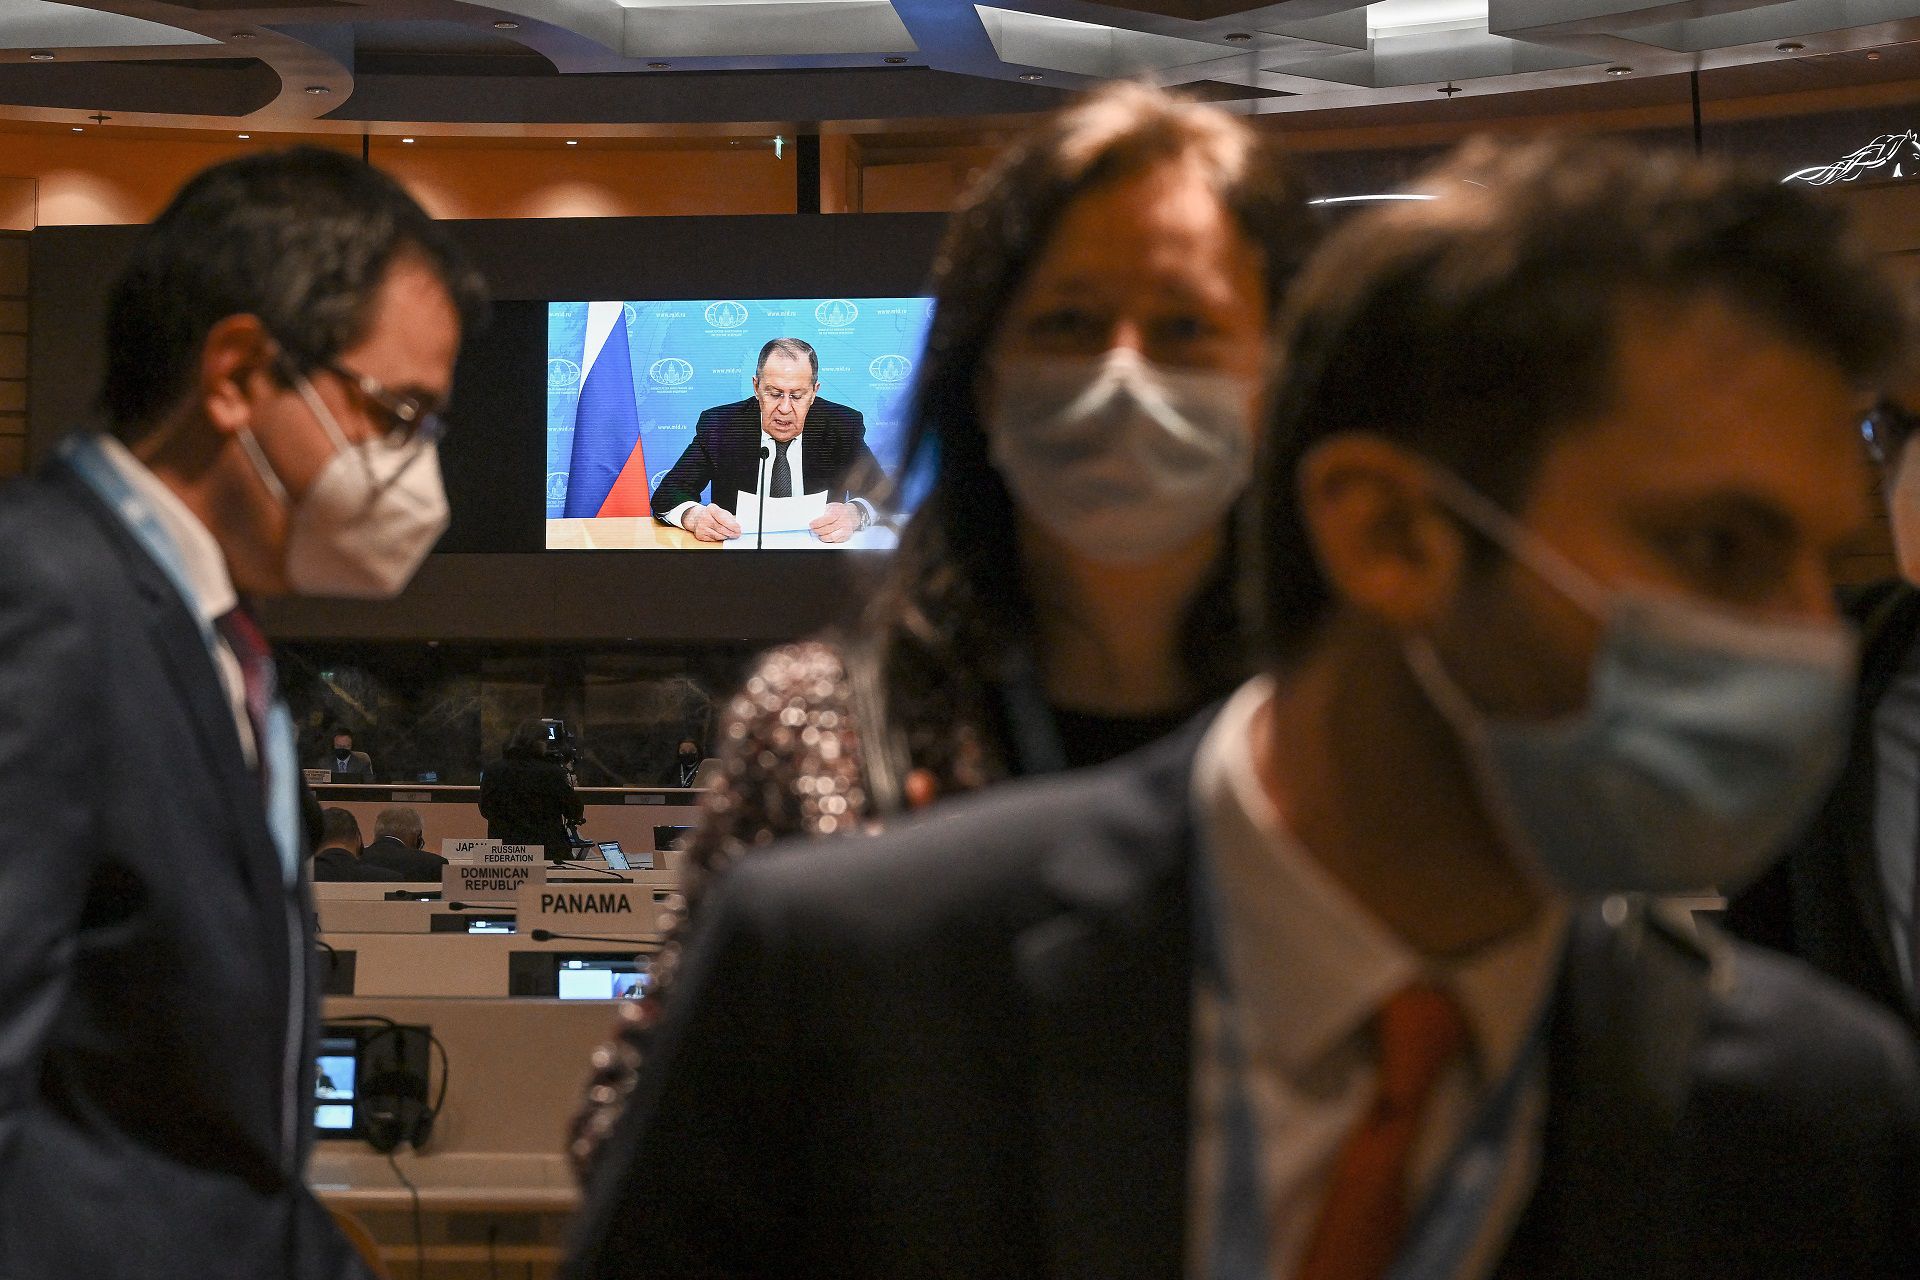 Ambassadors and diplomats walkout while Russia's foreign minister Sergei Lavrov (C on screen) addresses with a pre-recorded video message the Conference on Disarmament in Geneva on March 1, 2022. - The diplomats got up and left the room when Sergei Lavrov's pre-recorded video message began to play, in protest against Moscow's invasion of Ukraine. (Photo by Fabrice COFFRINI / POOL / AFP)